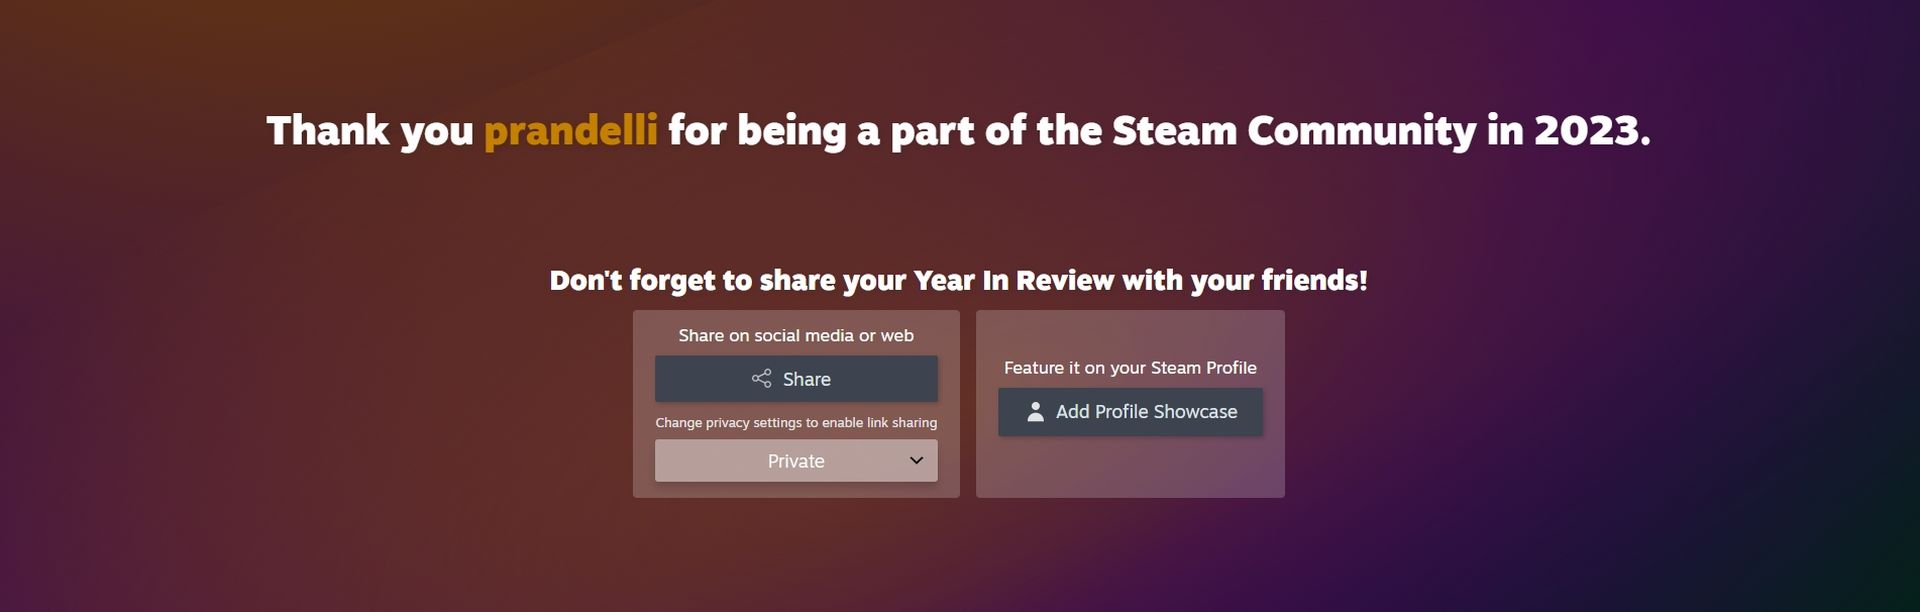 Steam recap 2023: Steam Year in Review has gone live